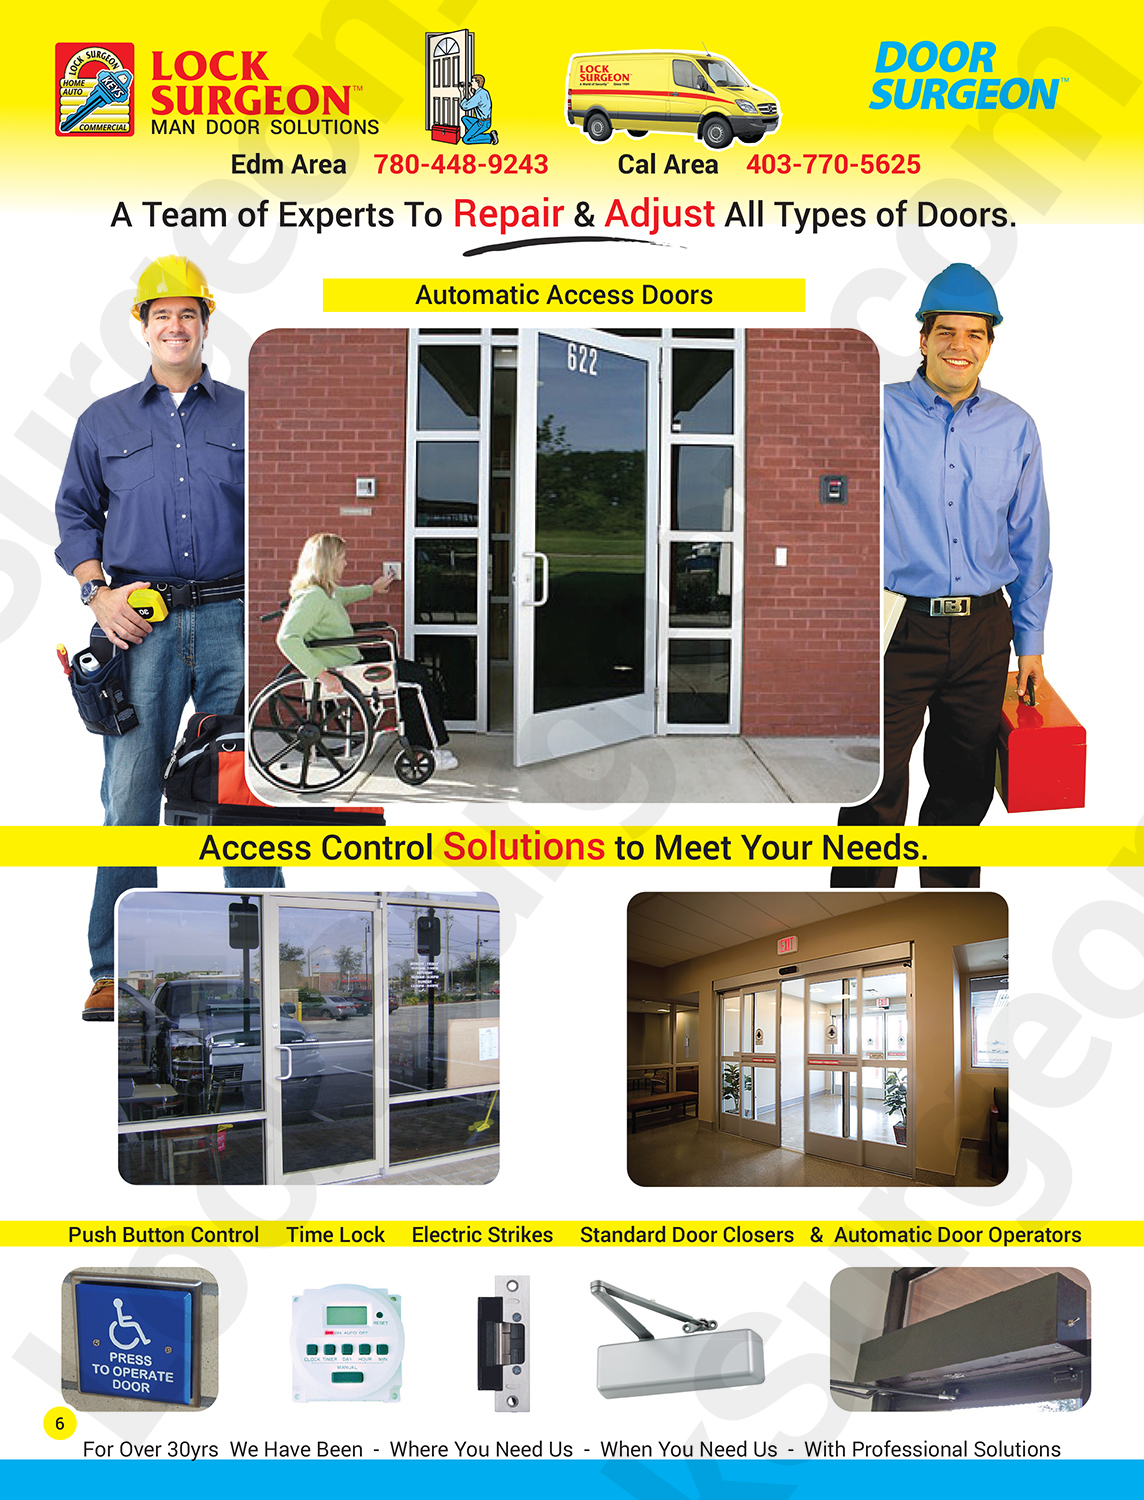 Lock Surgeon automatic access doors & access control solutions for commercial industrial doors.